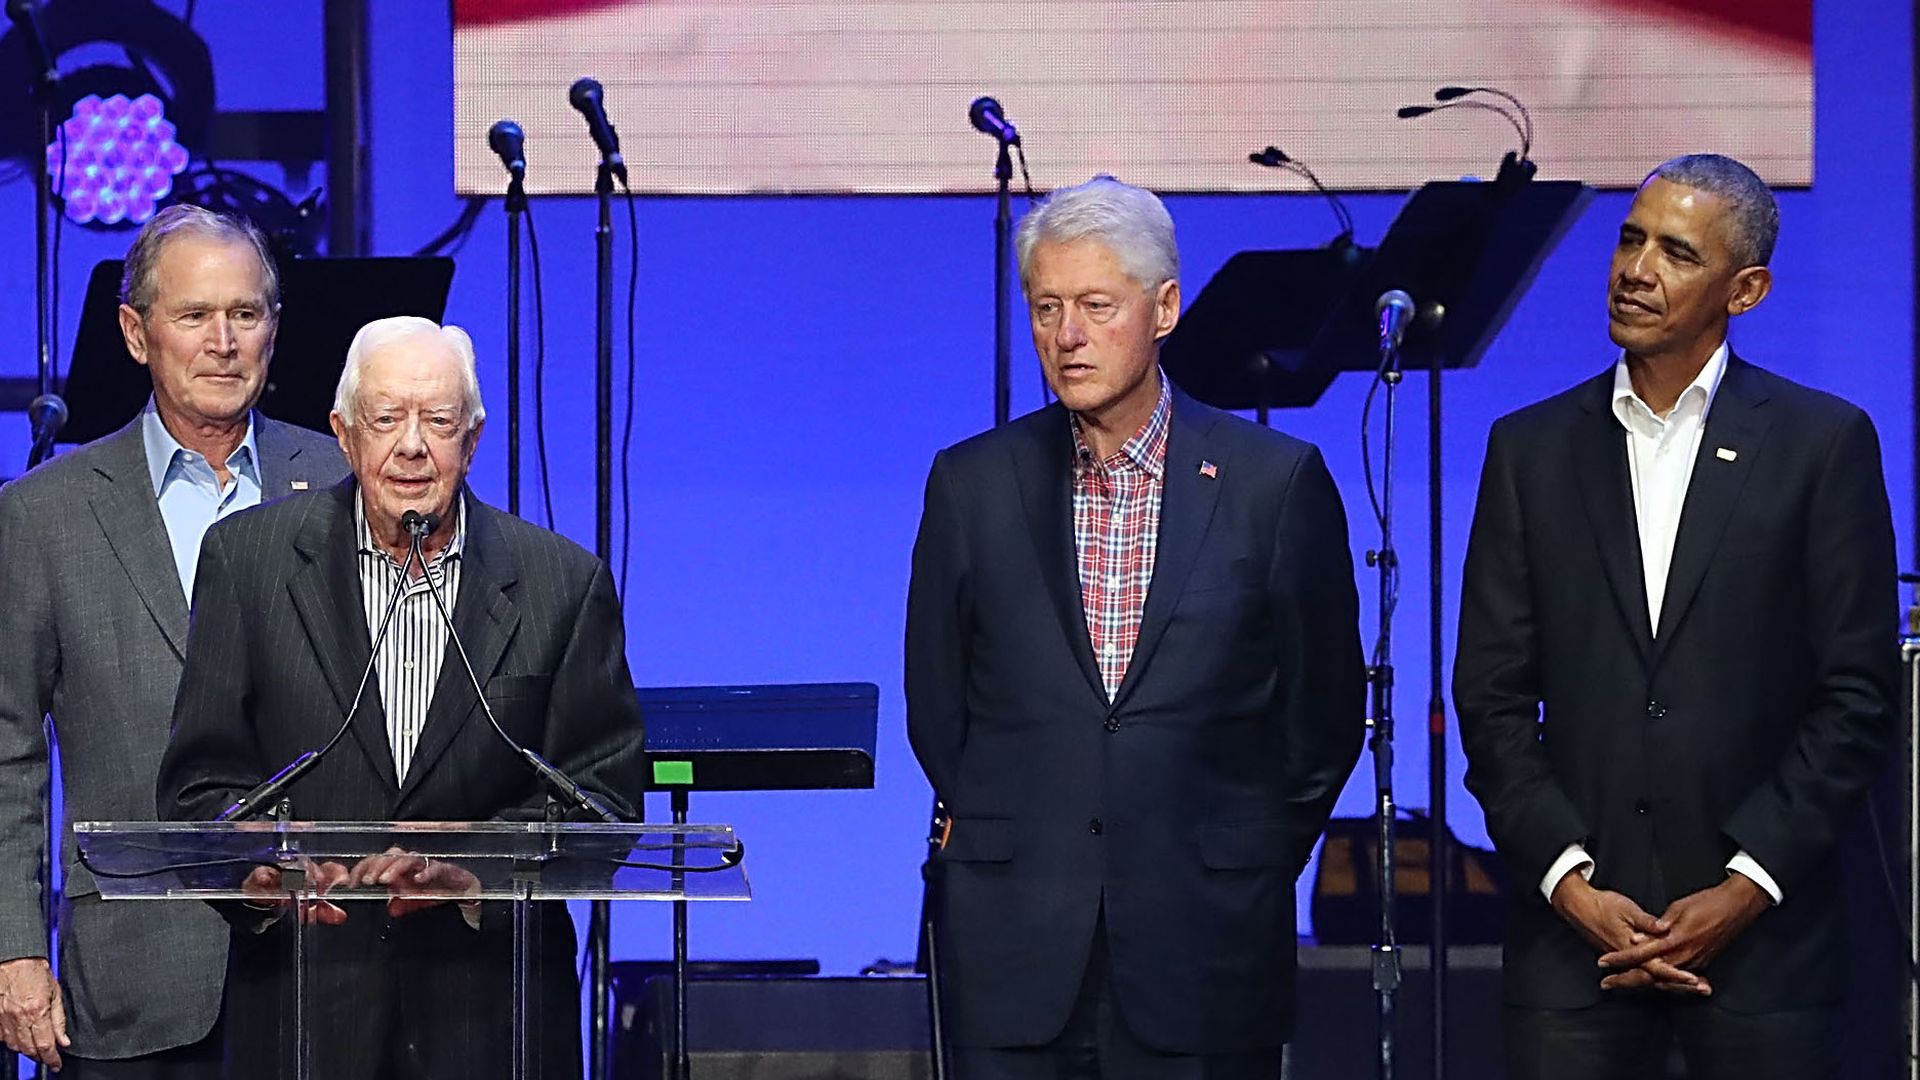  Former Presidents George W. Bush, Jimmy Carter, Bill Clinton and Barack Obama address the audience during a 2017 concert at Reed Arena in College Station, Texas. Photo: Gary Miller/Getty Images